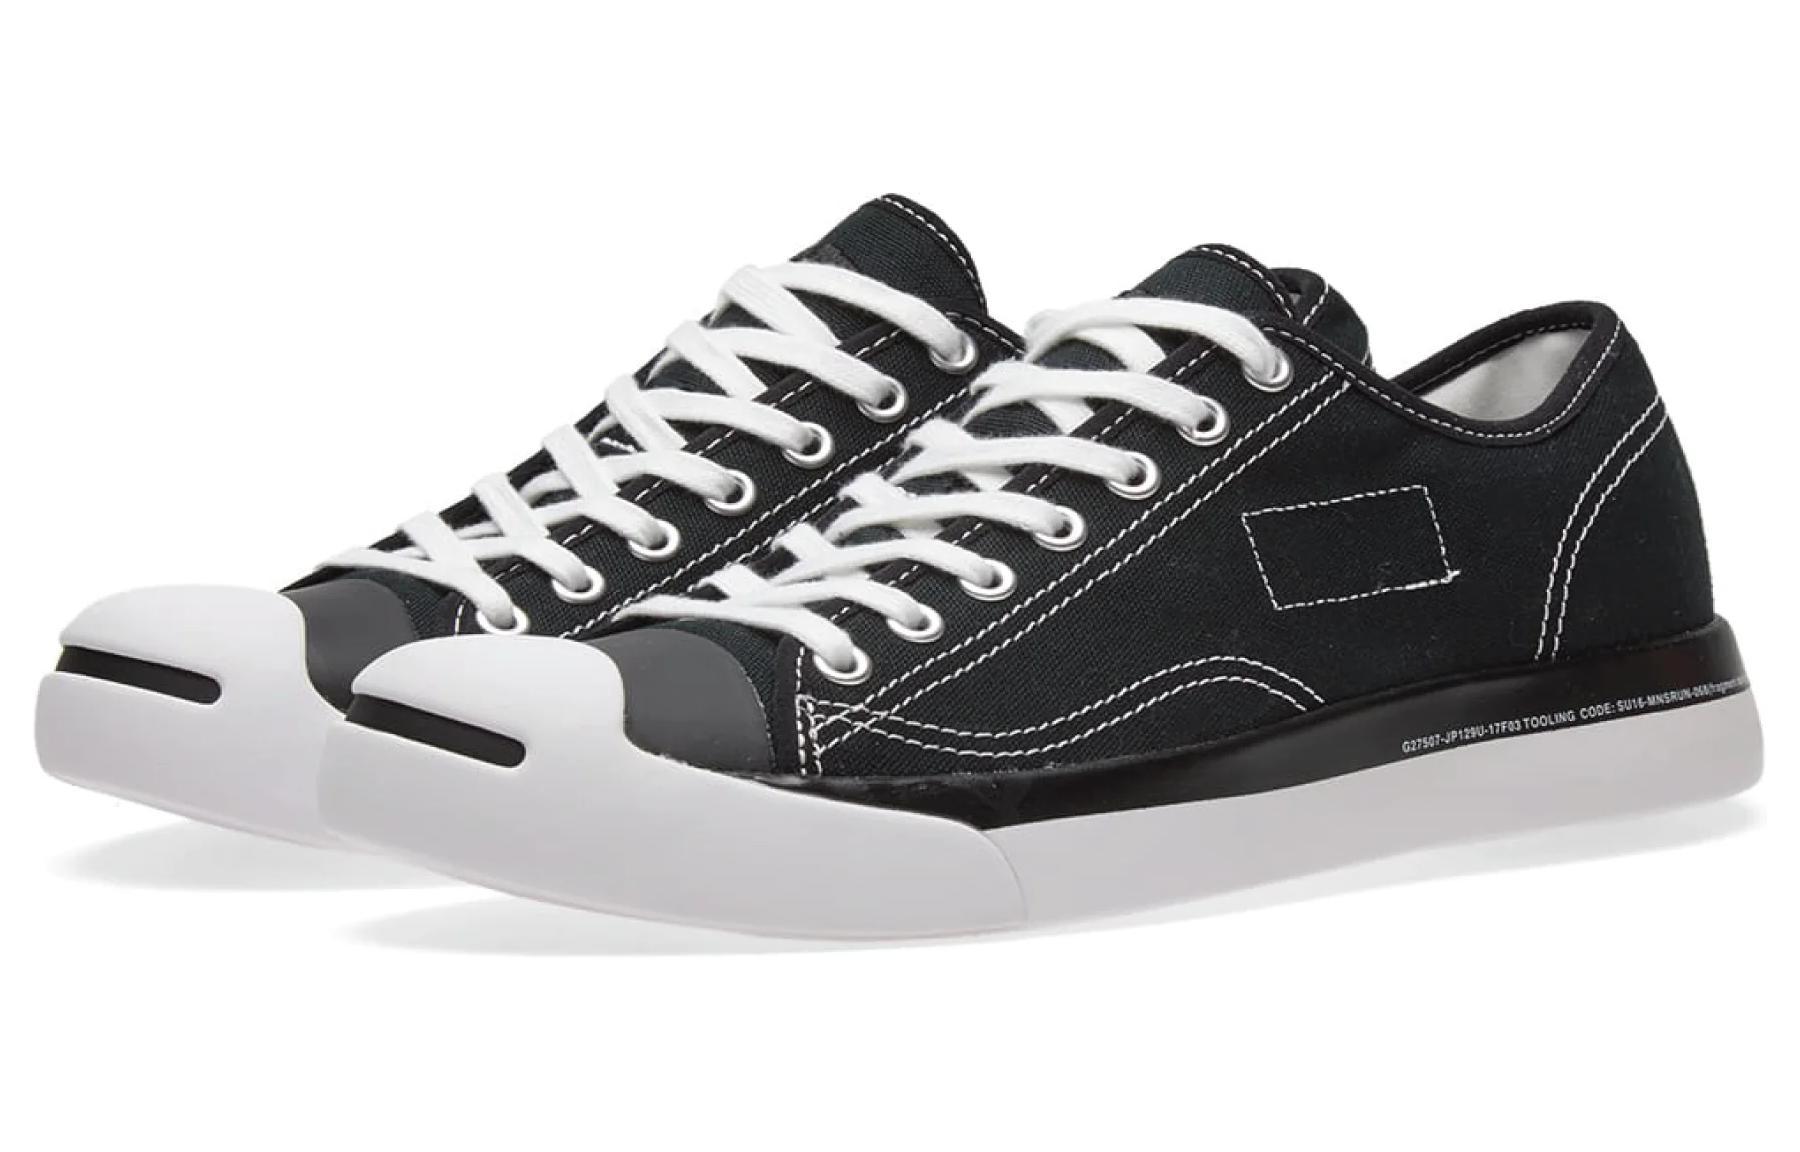 Fragment x Converse Jack Purcell